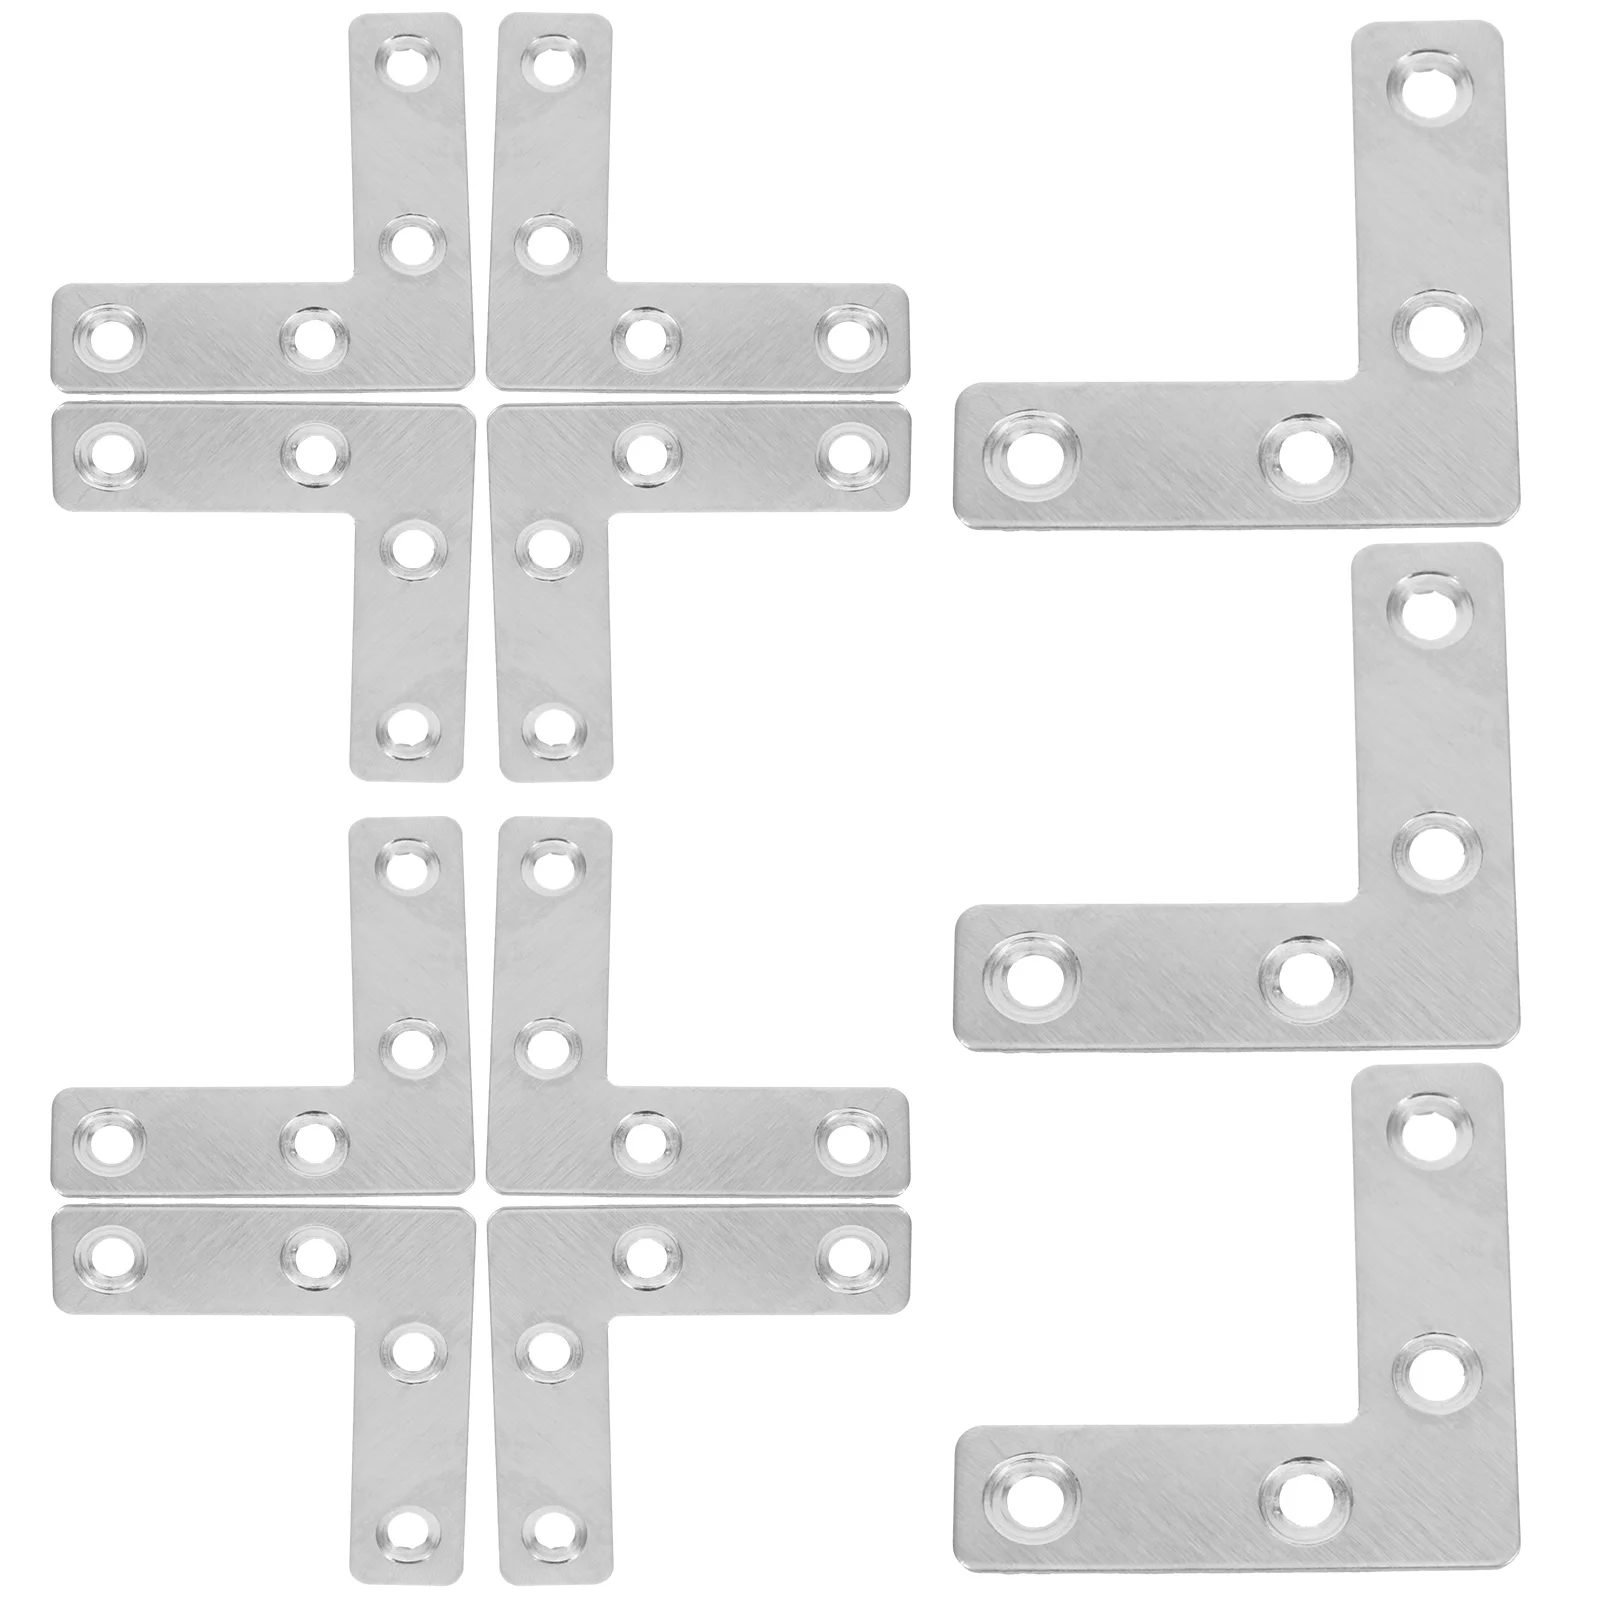 

36 Pcs Corner Code Hardware Metal Holder Brackets for Wood Braces Flat Surface Stainless Steel Small